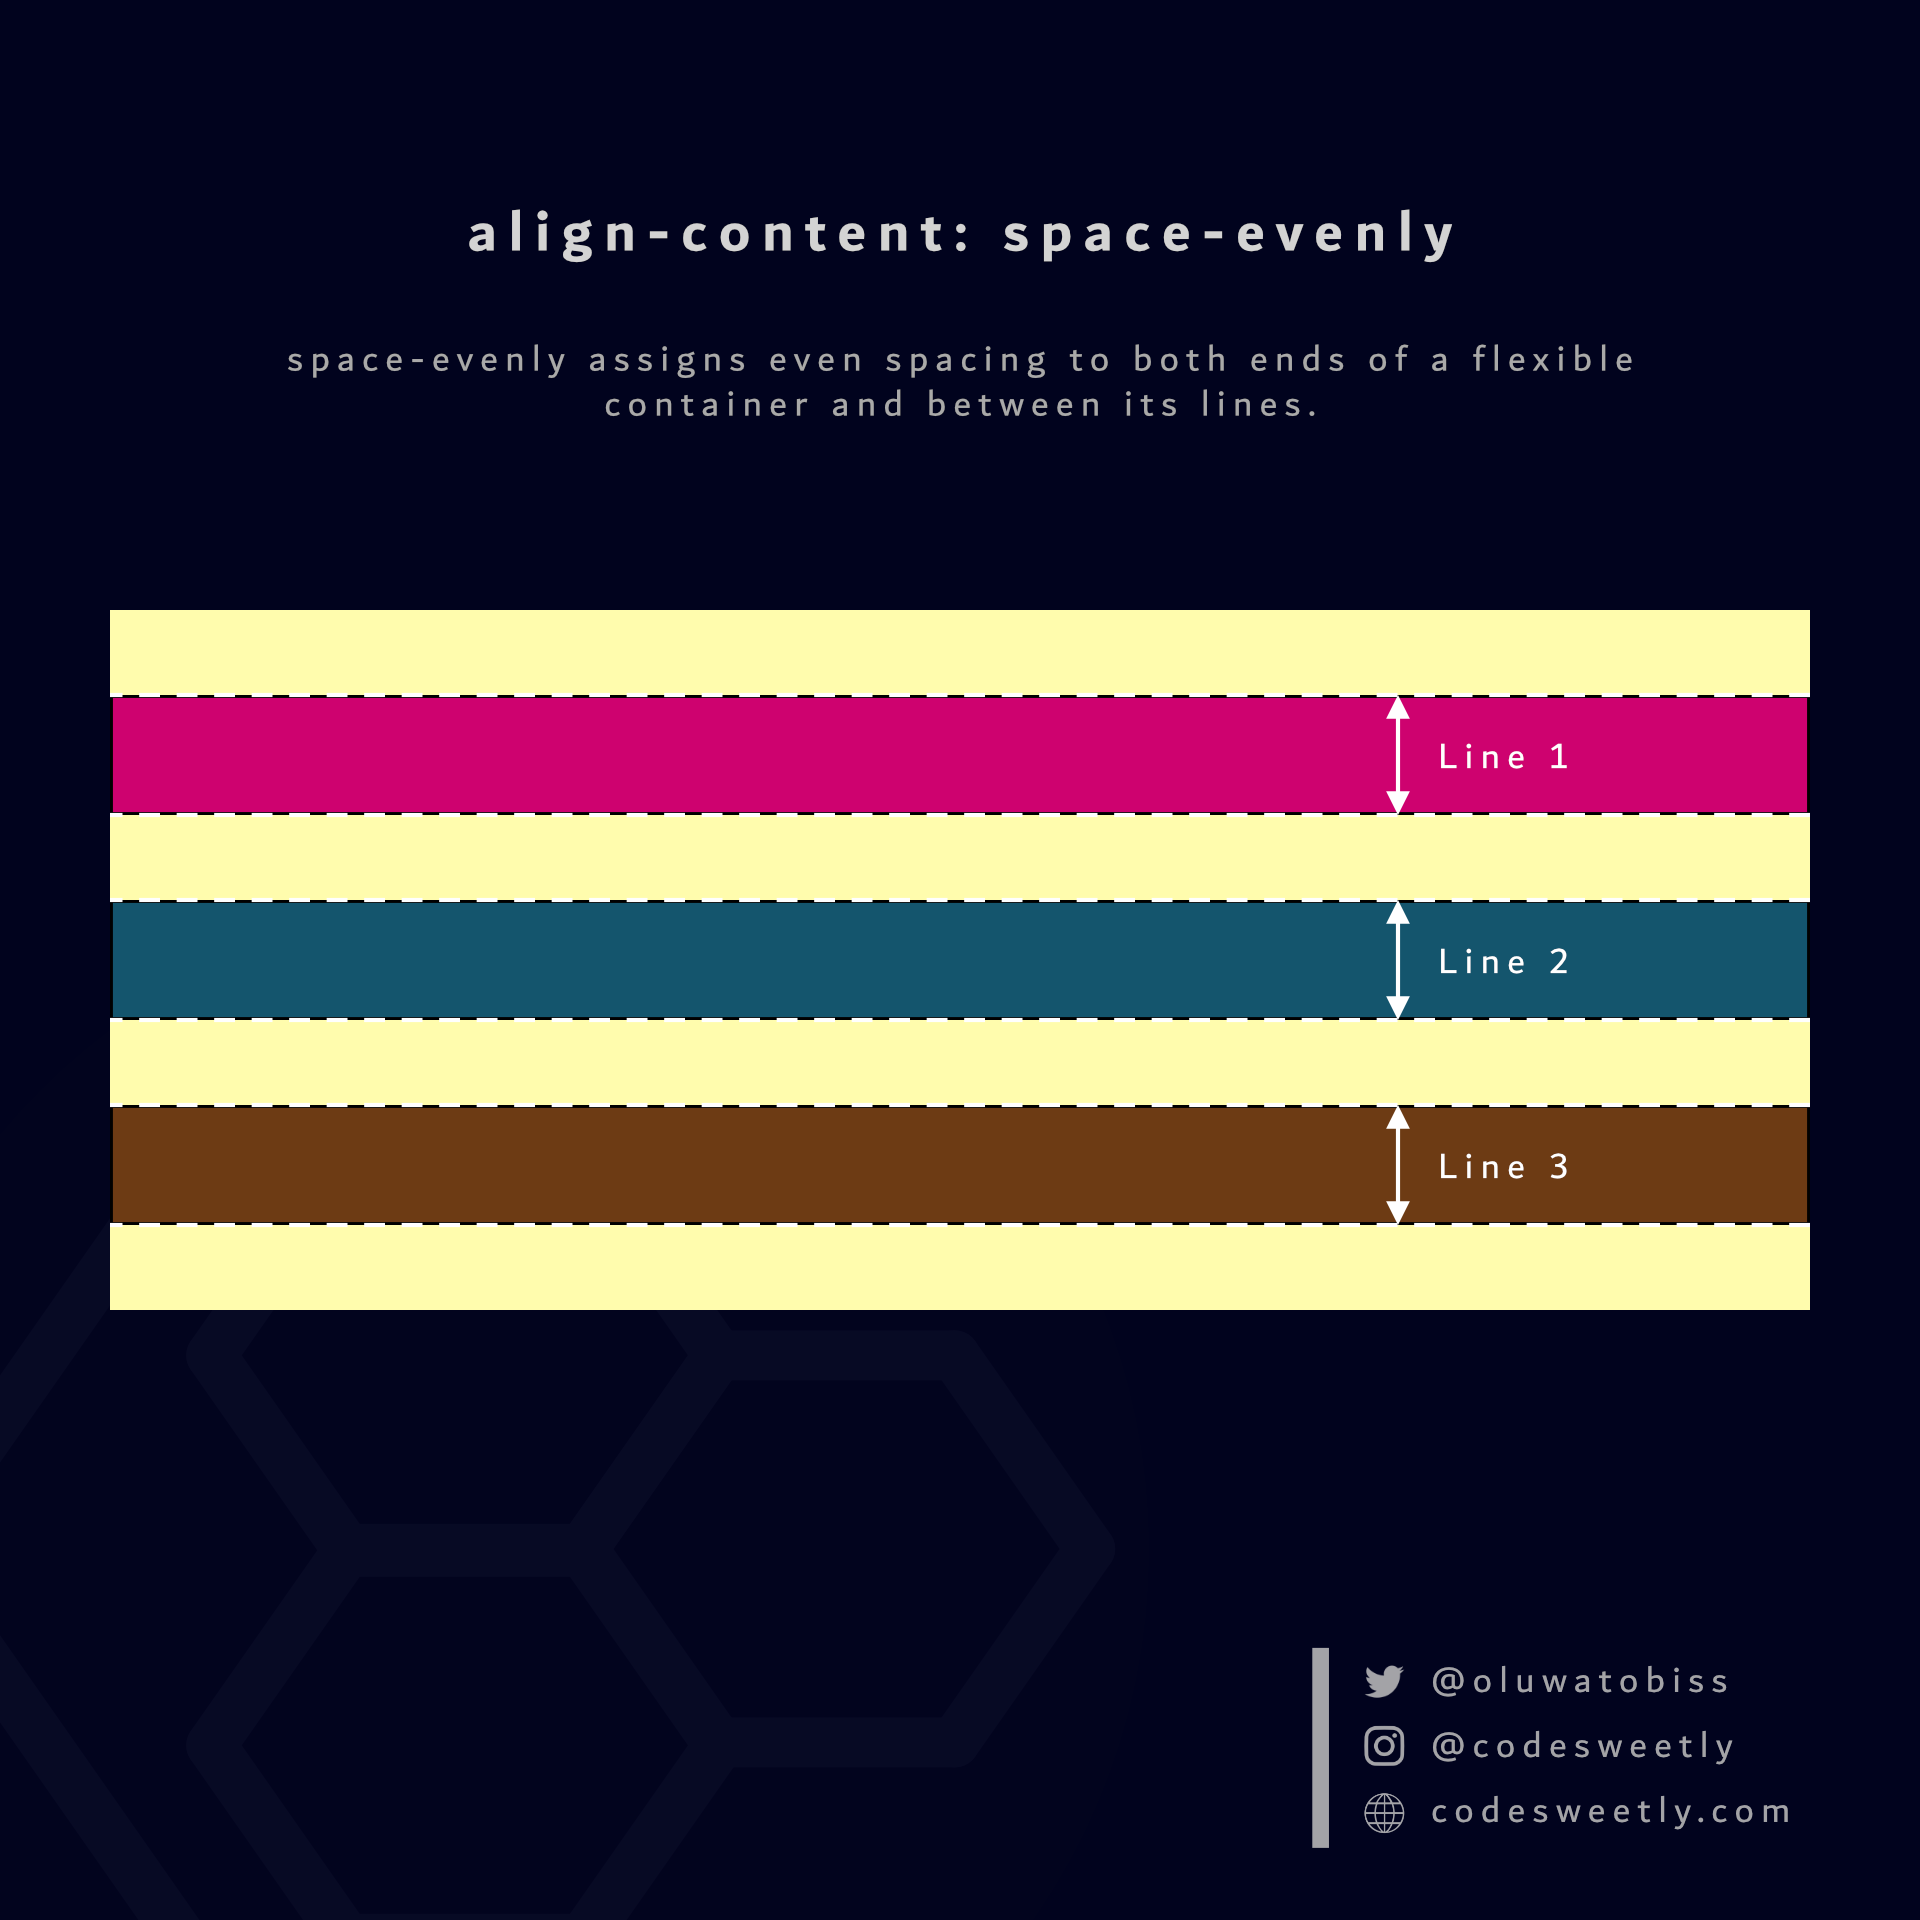 Illustration of align-content's space-evenly value